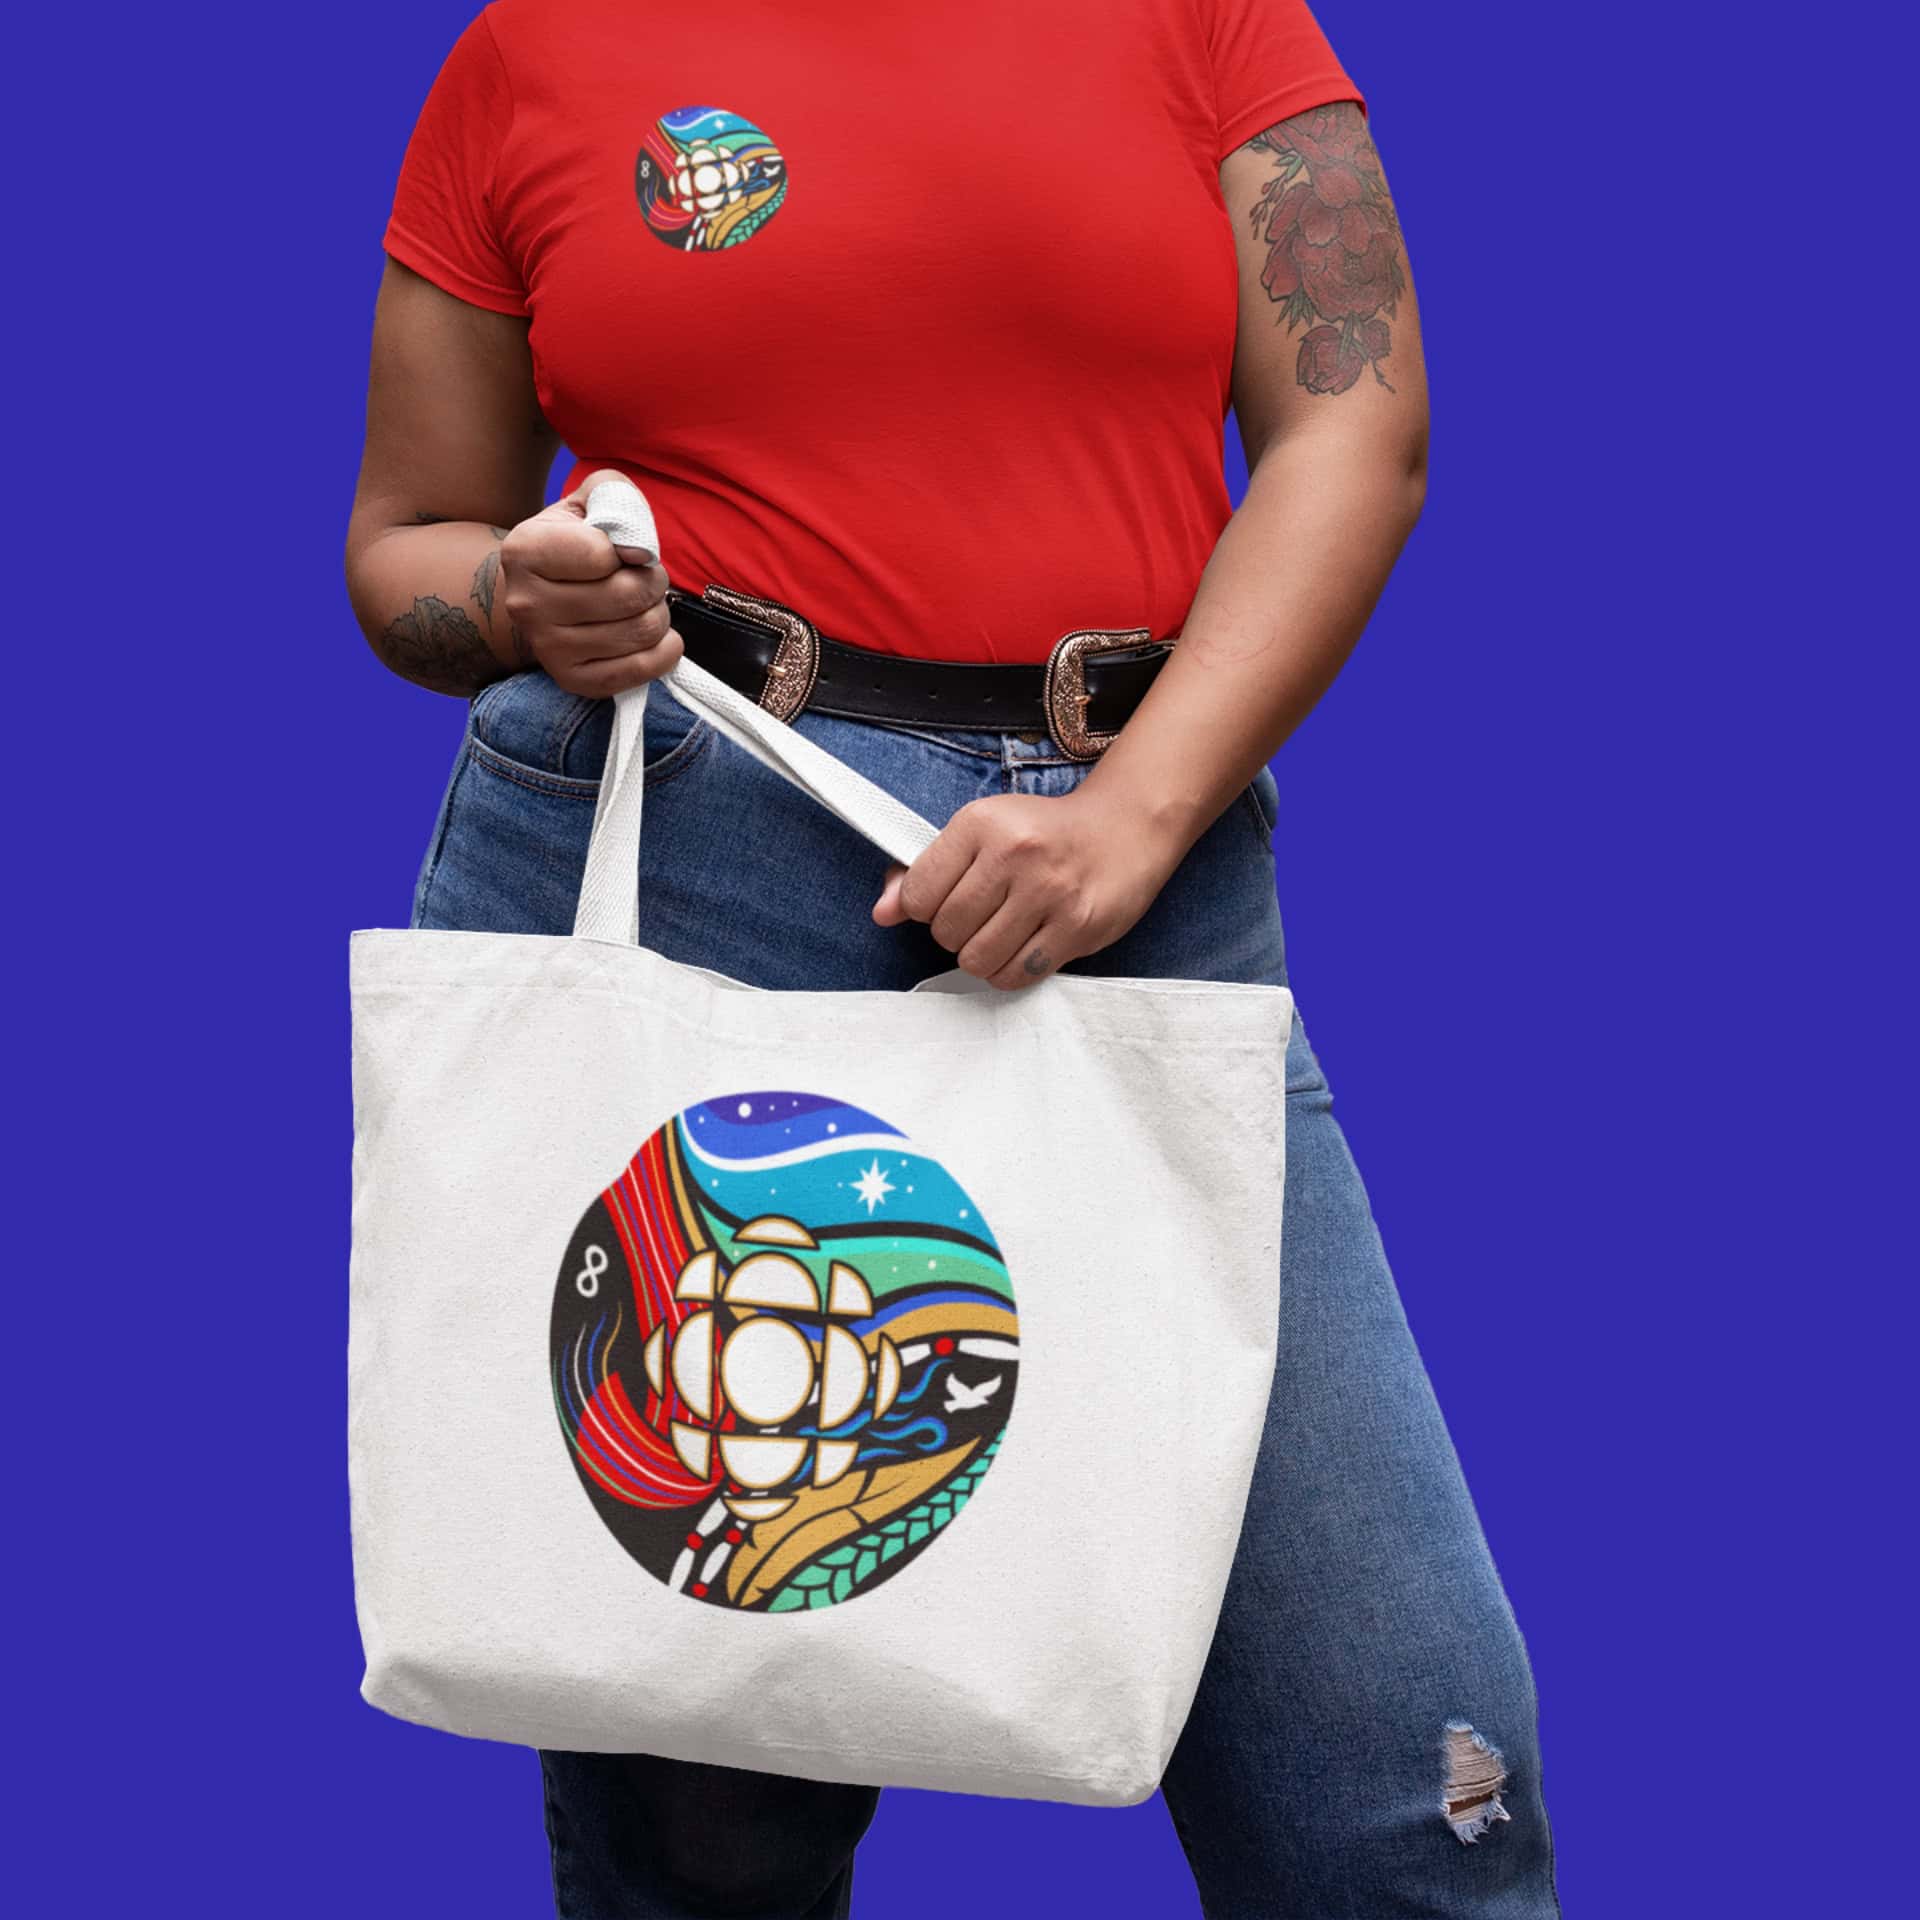 A woman wearing a red shirt and jeans is holding a tote. On her t-shirt and on the tote are displayed the CBC 'gem' designed by DDP